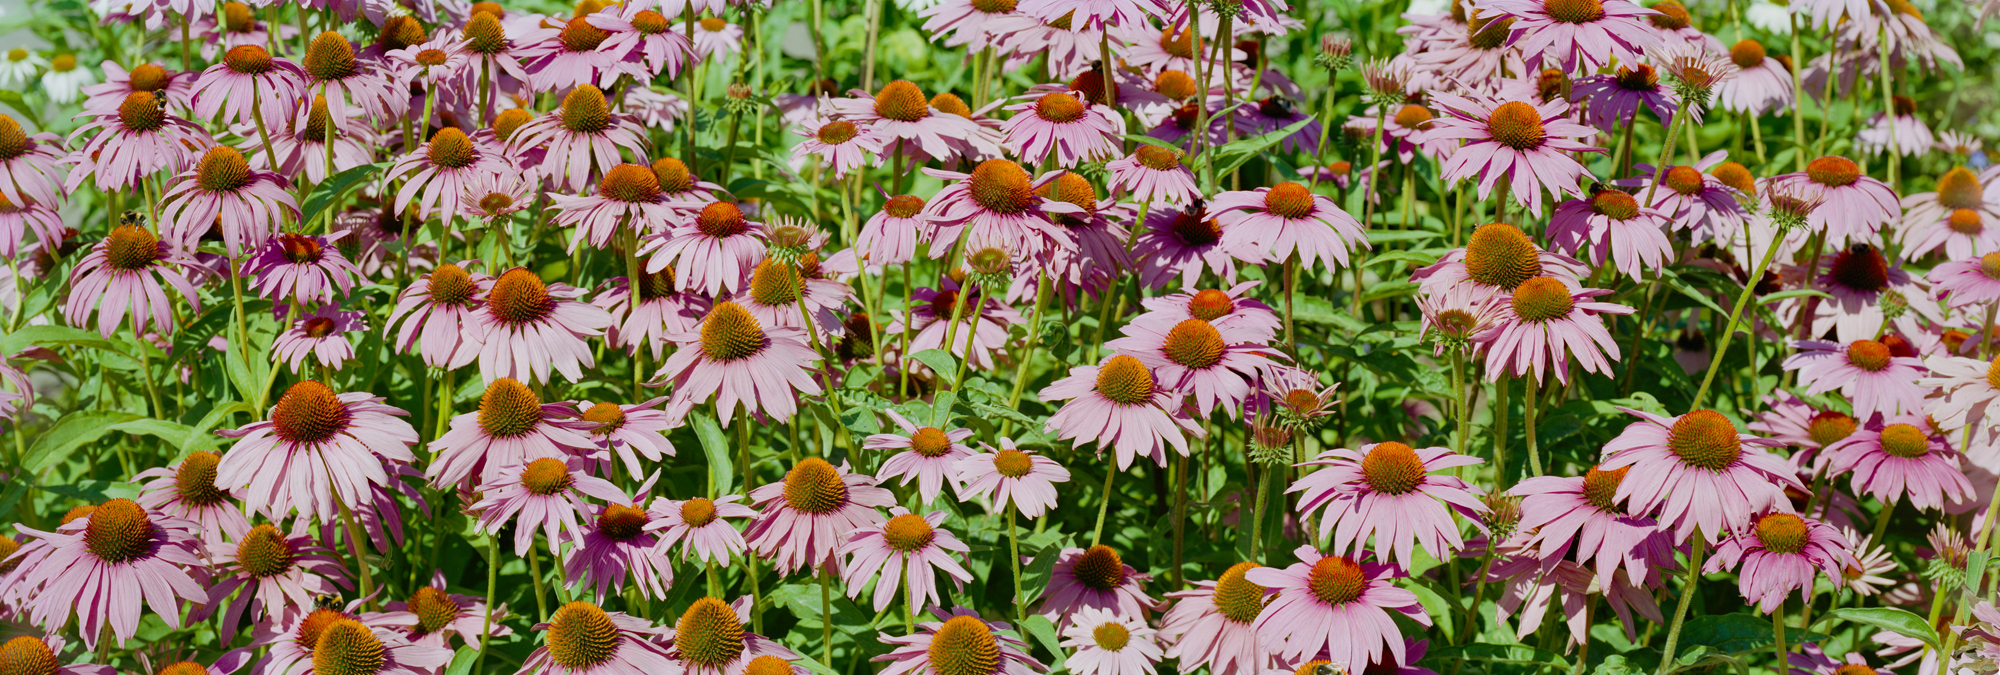 The echinacea, which blooms purple just before wilting, stand out clearly against the green of their stems. A wonderful panoramic photograph by the Bensberg artist Markus Bollen.